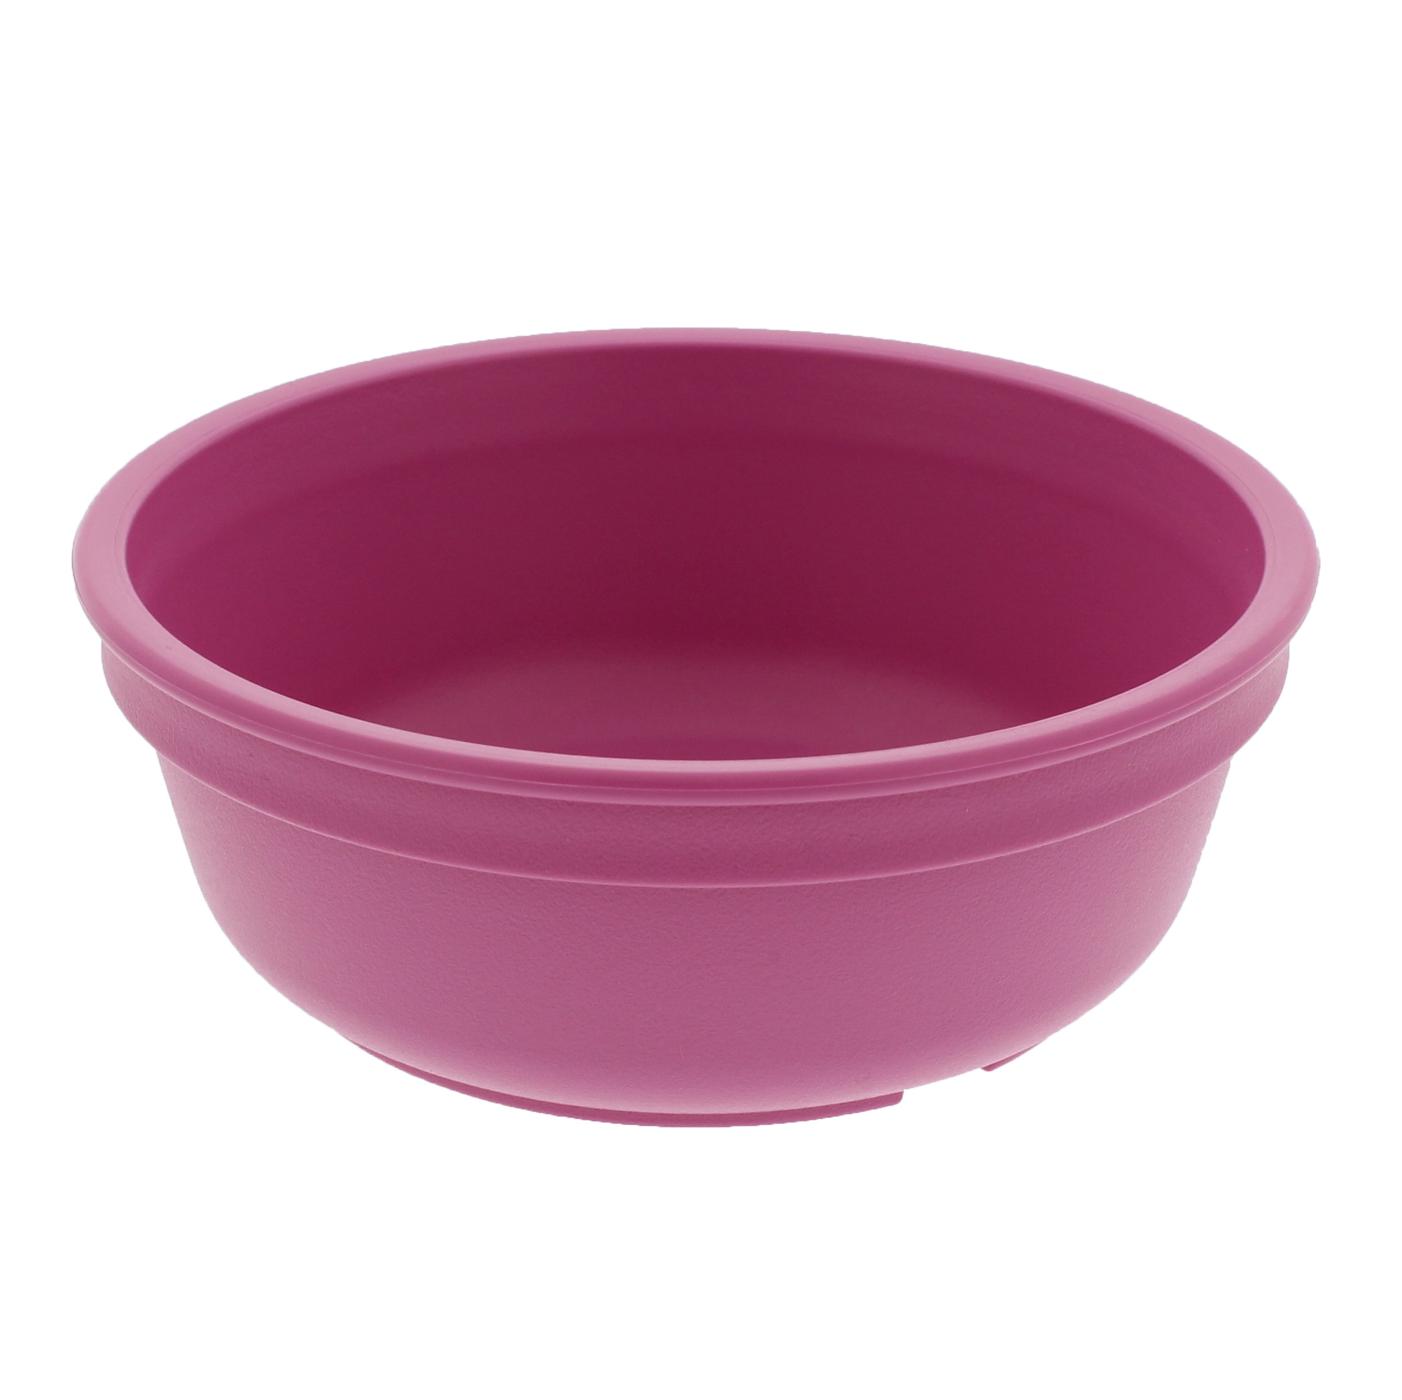 Re-Play Toddler Bowl, Assorted Colors; image 2 of 6